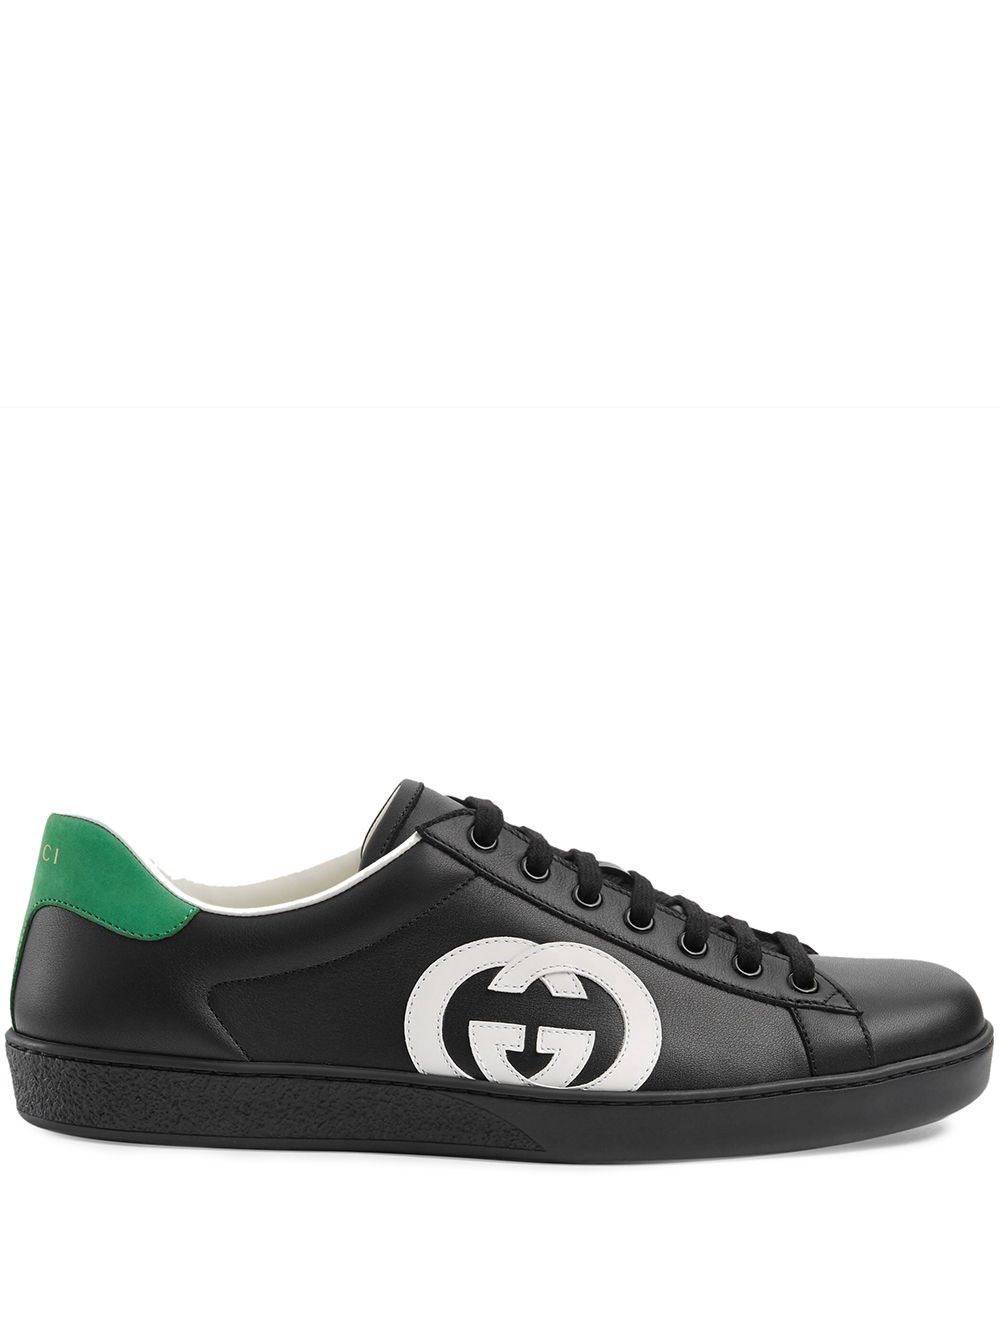 gucci SNEAKERS MIRÒ LOGO GG available on montiboutique.com - 37801